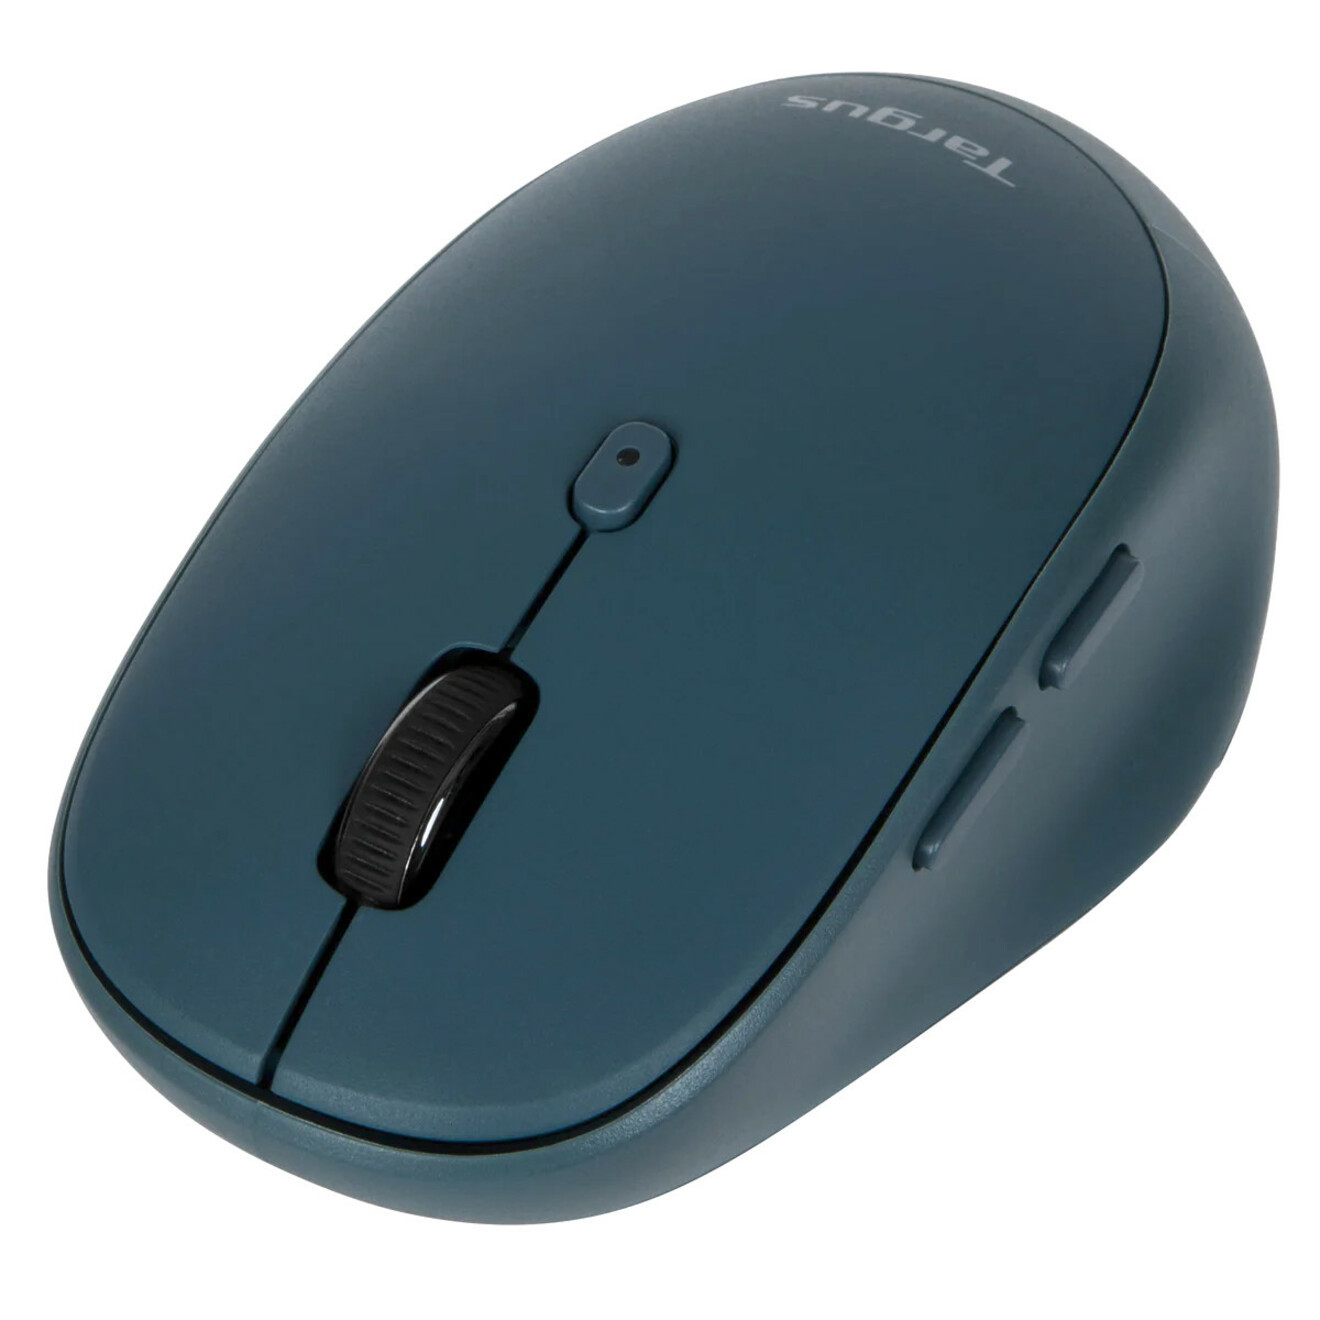 Targus Midsize Comfort Multi-Device Antimicrobial Wireless MouseMid Size MouseOpticalWirelessBluetooth2.40 GHzBlue2400 d… PMB58202GL